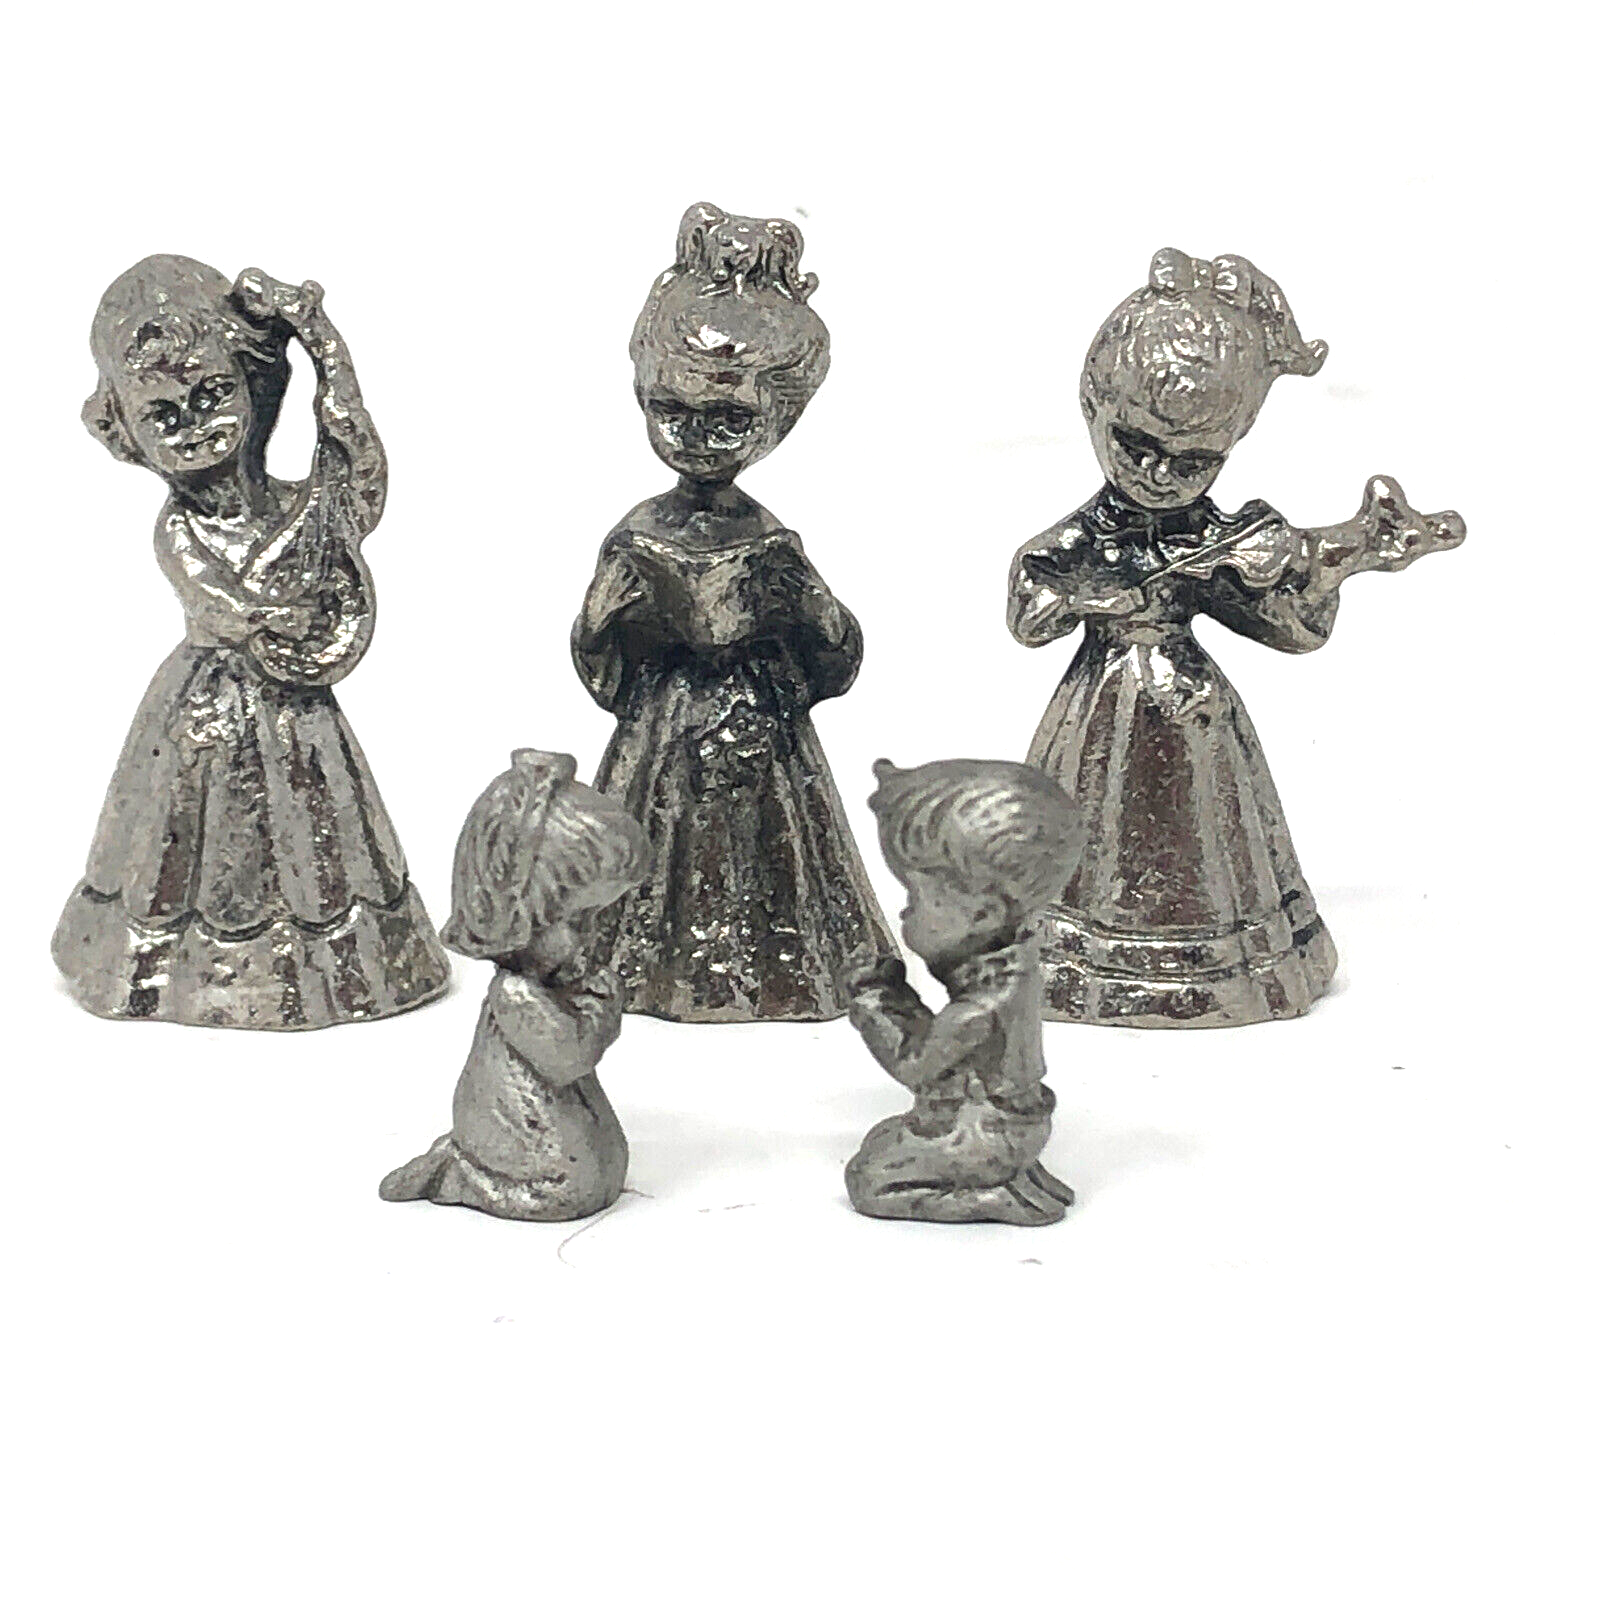 Primary image for Vintage Miniature Pewter Figurines 2 Praying Children 3 Girl Musicians Lot of 5